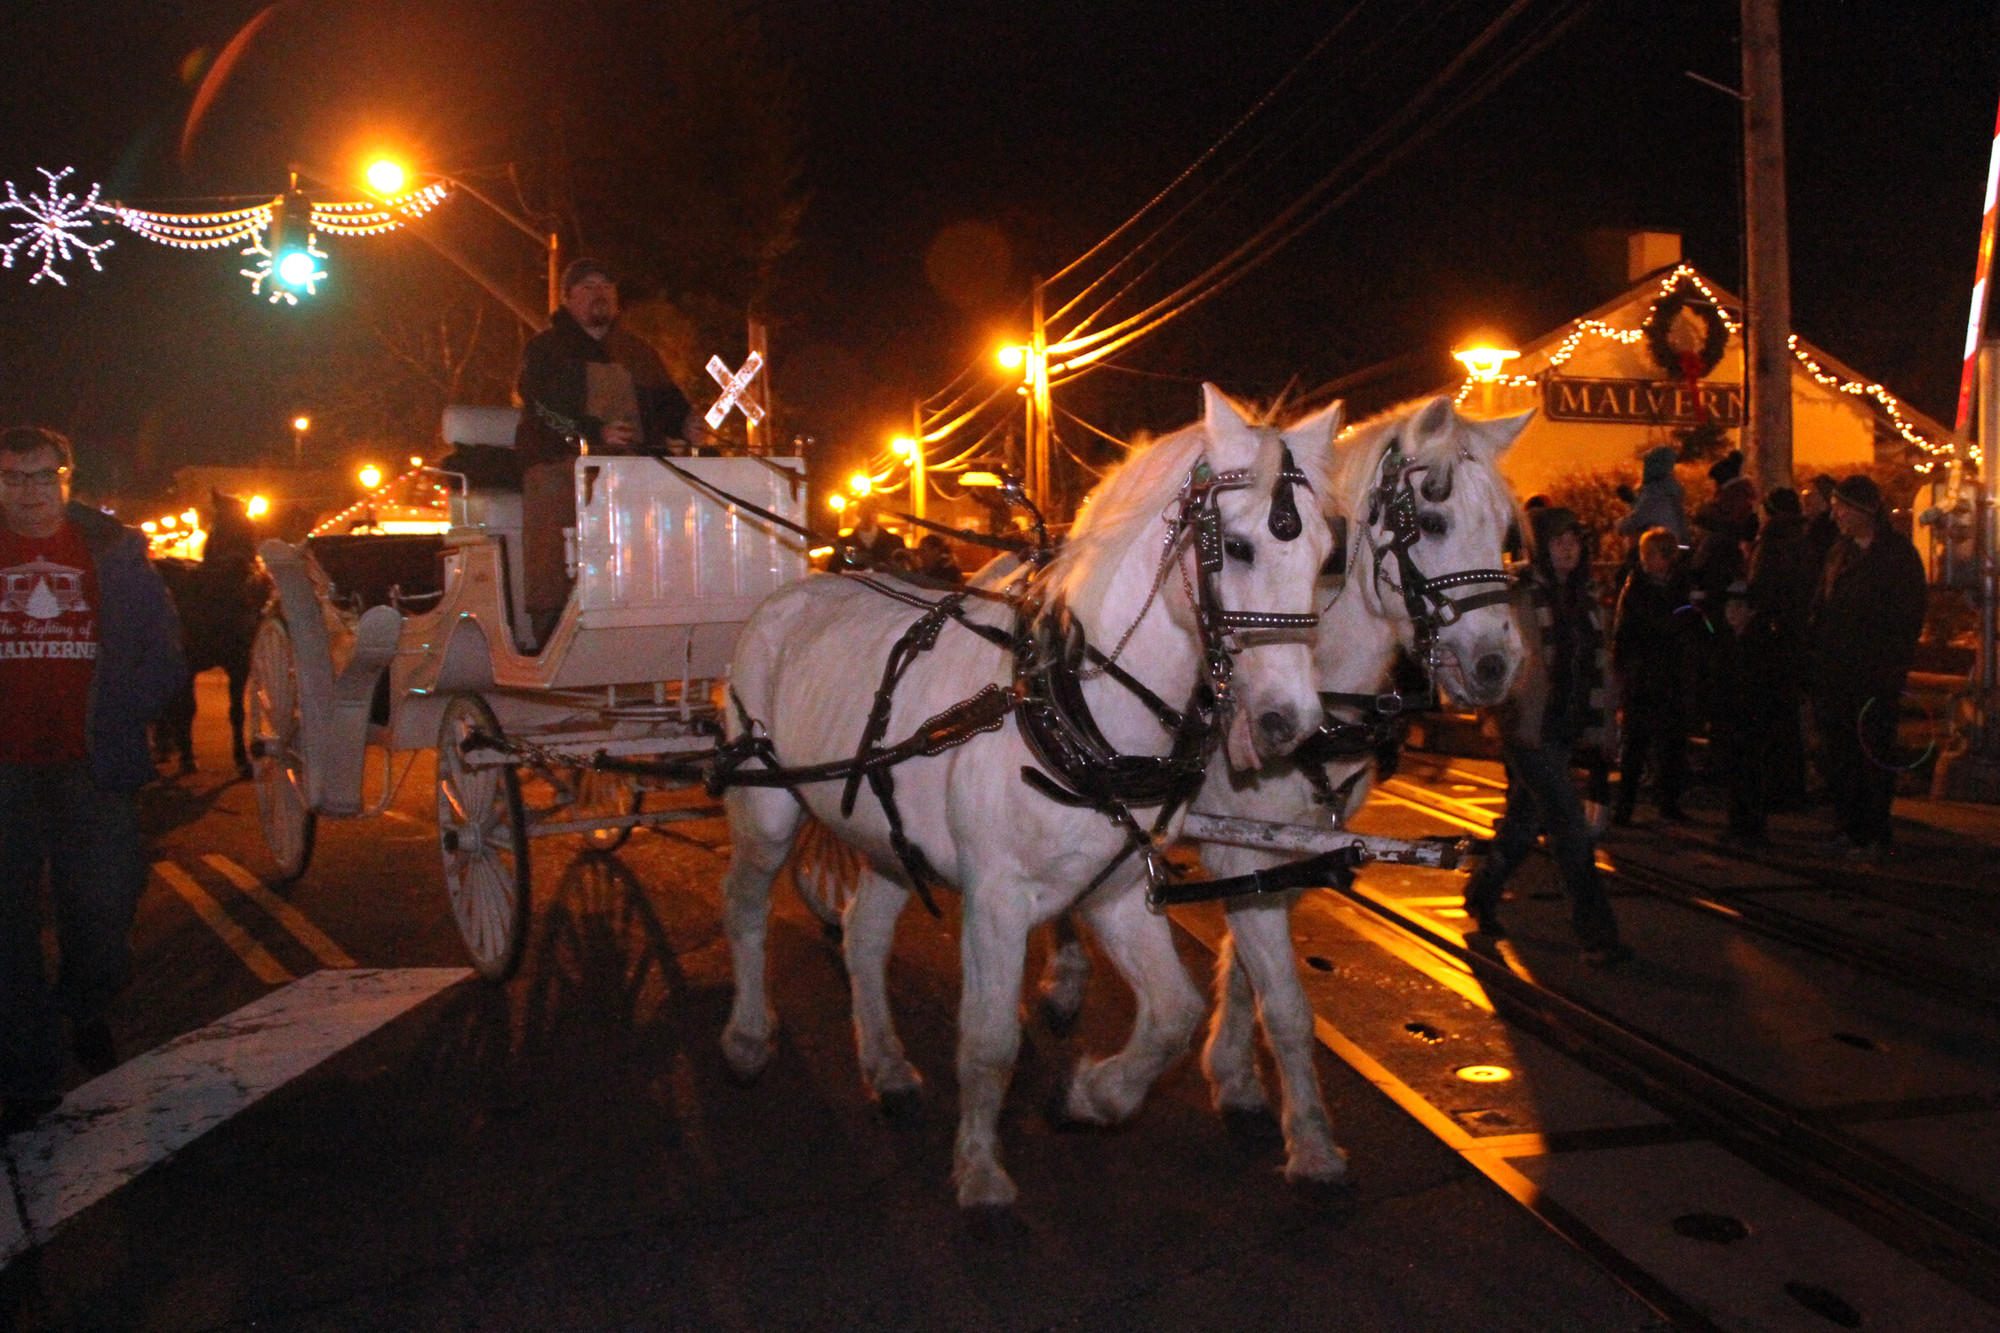 A 2-horsepower carriage offered a scenic ride around the Village of Malverne for visitors at this year’s tree lighting ceremony last Saturday.